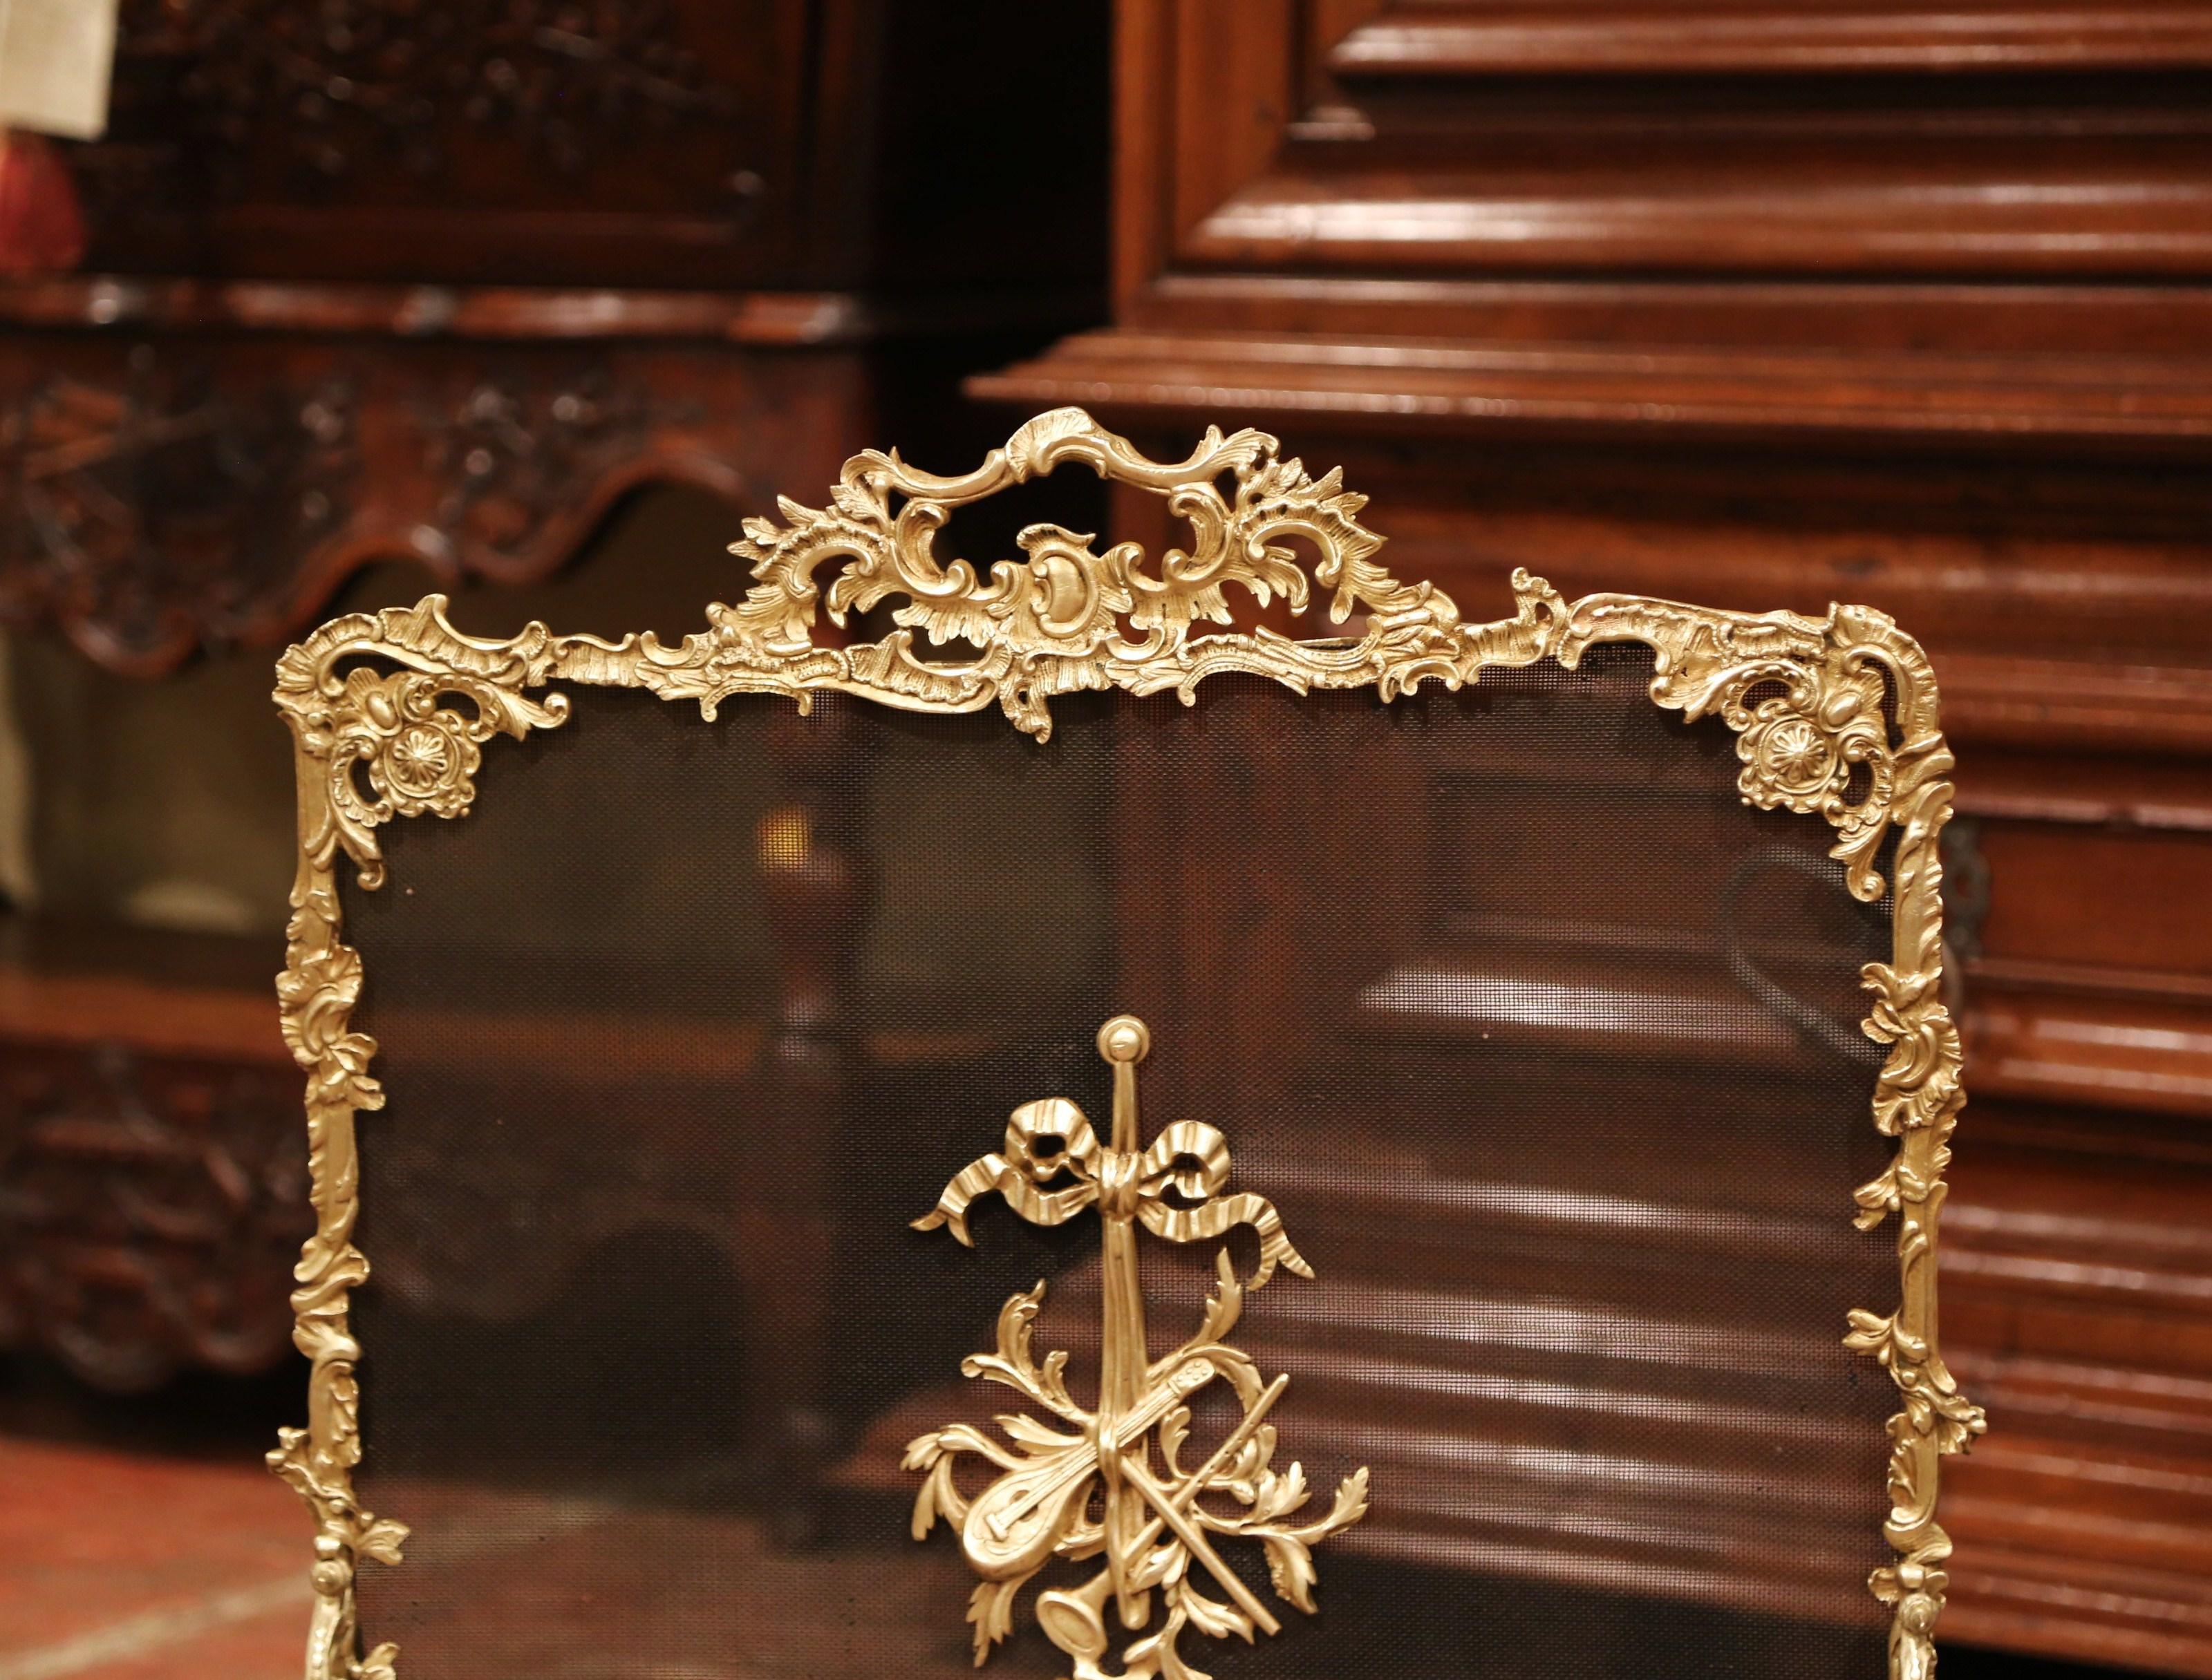 Patinated 19th Century French Louis XV Gilt Bronze Fire Screen with Musical Mounts